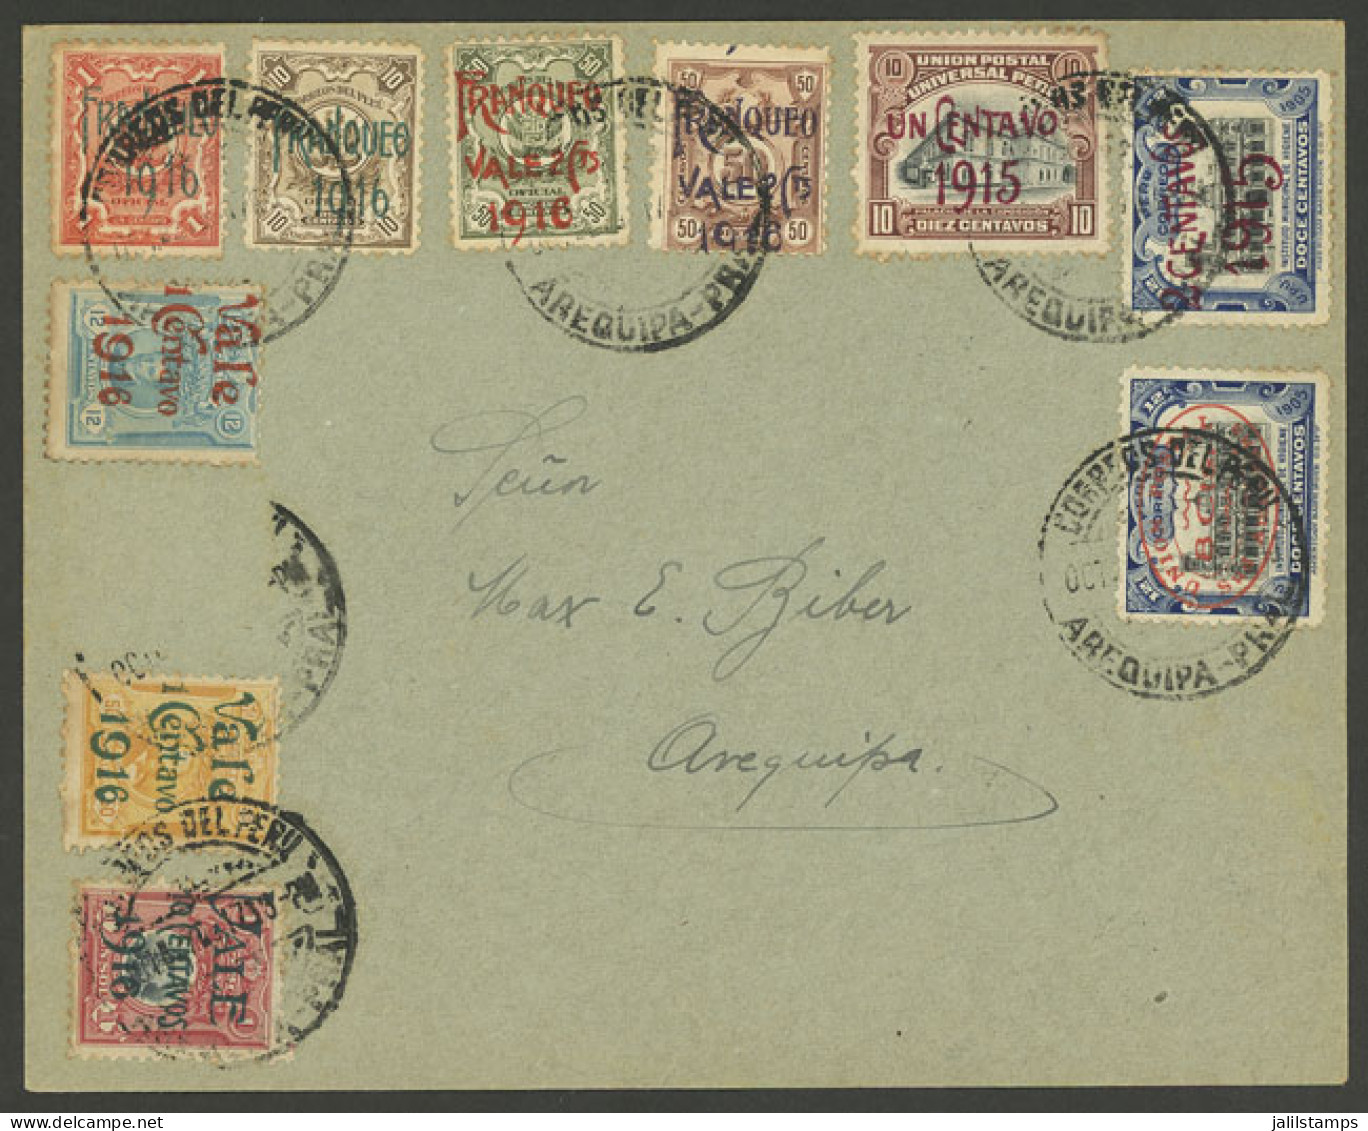 PERU: Cover Used In Arequipa In OC/1917 With Multicolor Postage Of 10 Overprinted Stamps, VF Quality! - Perù